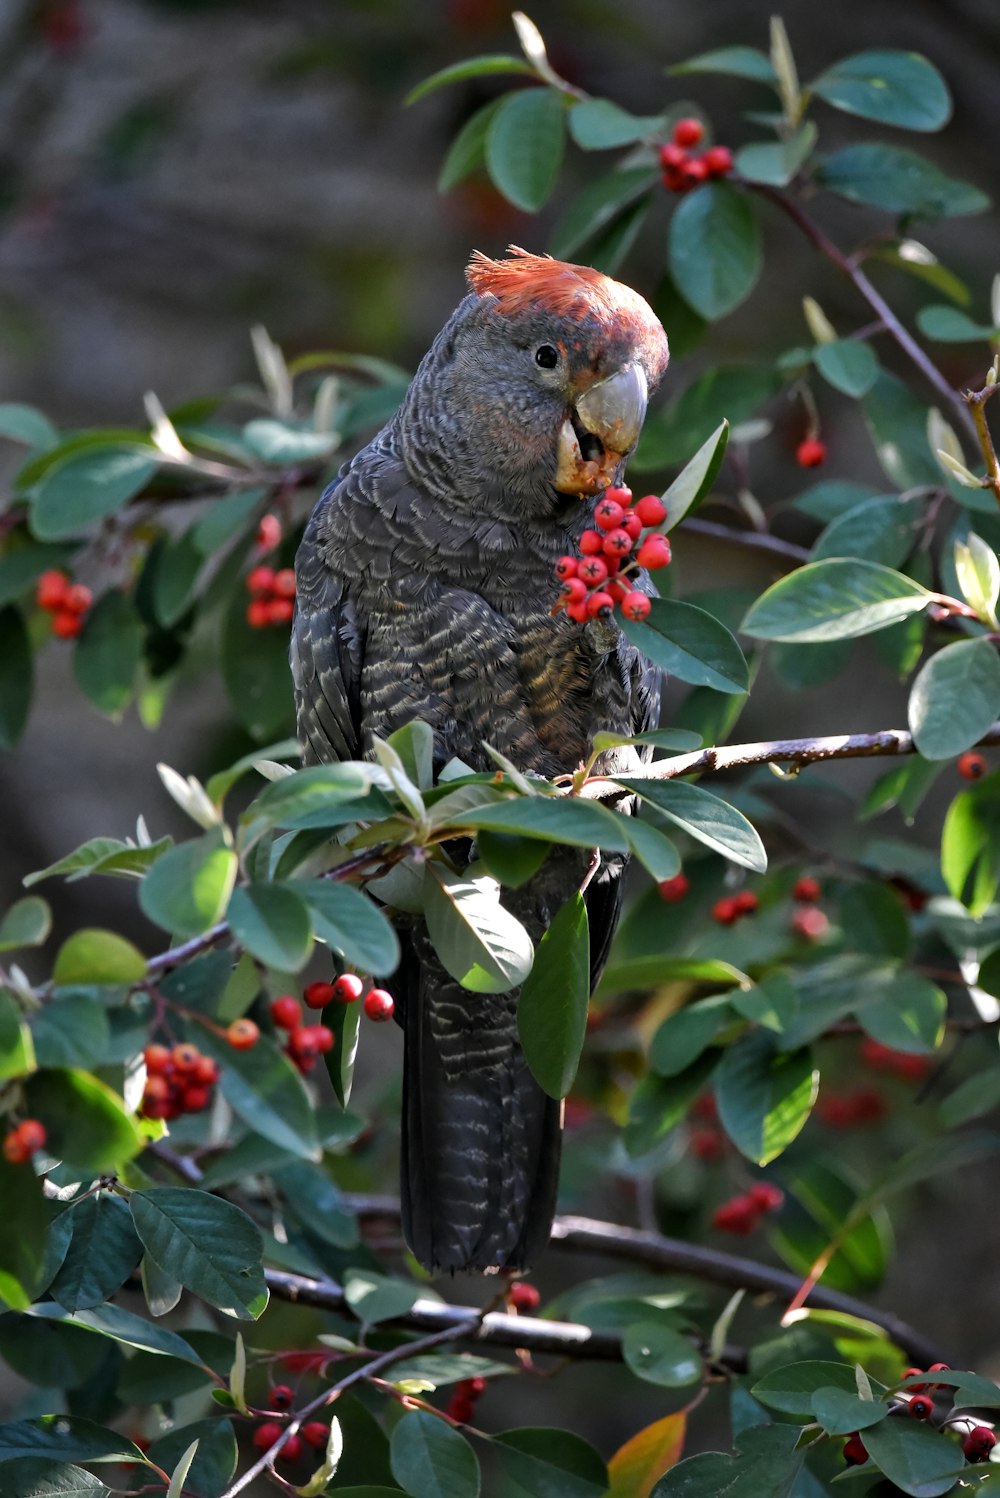 a bird on a branch with berries